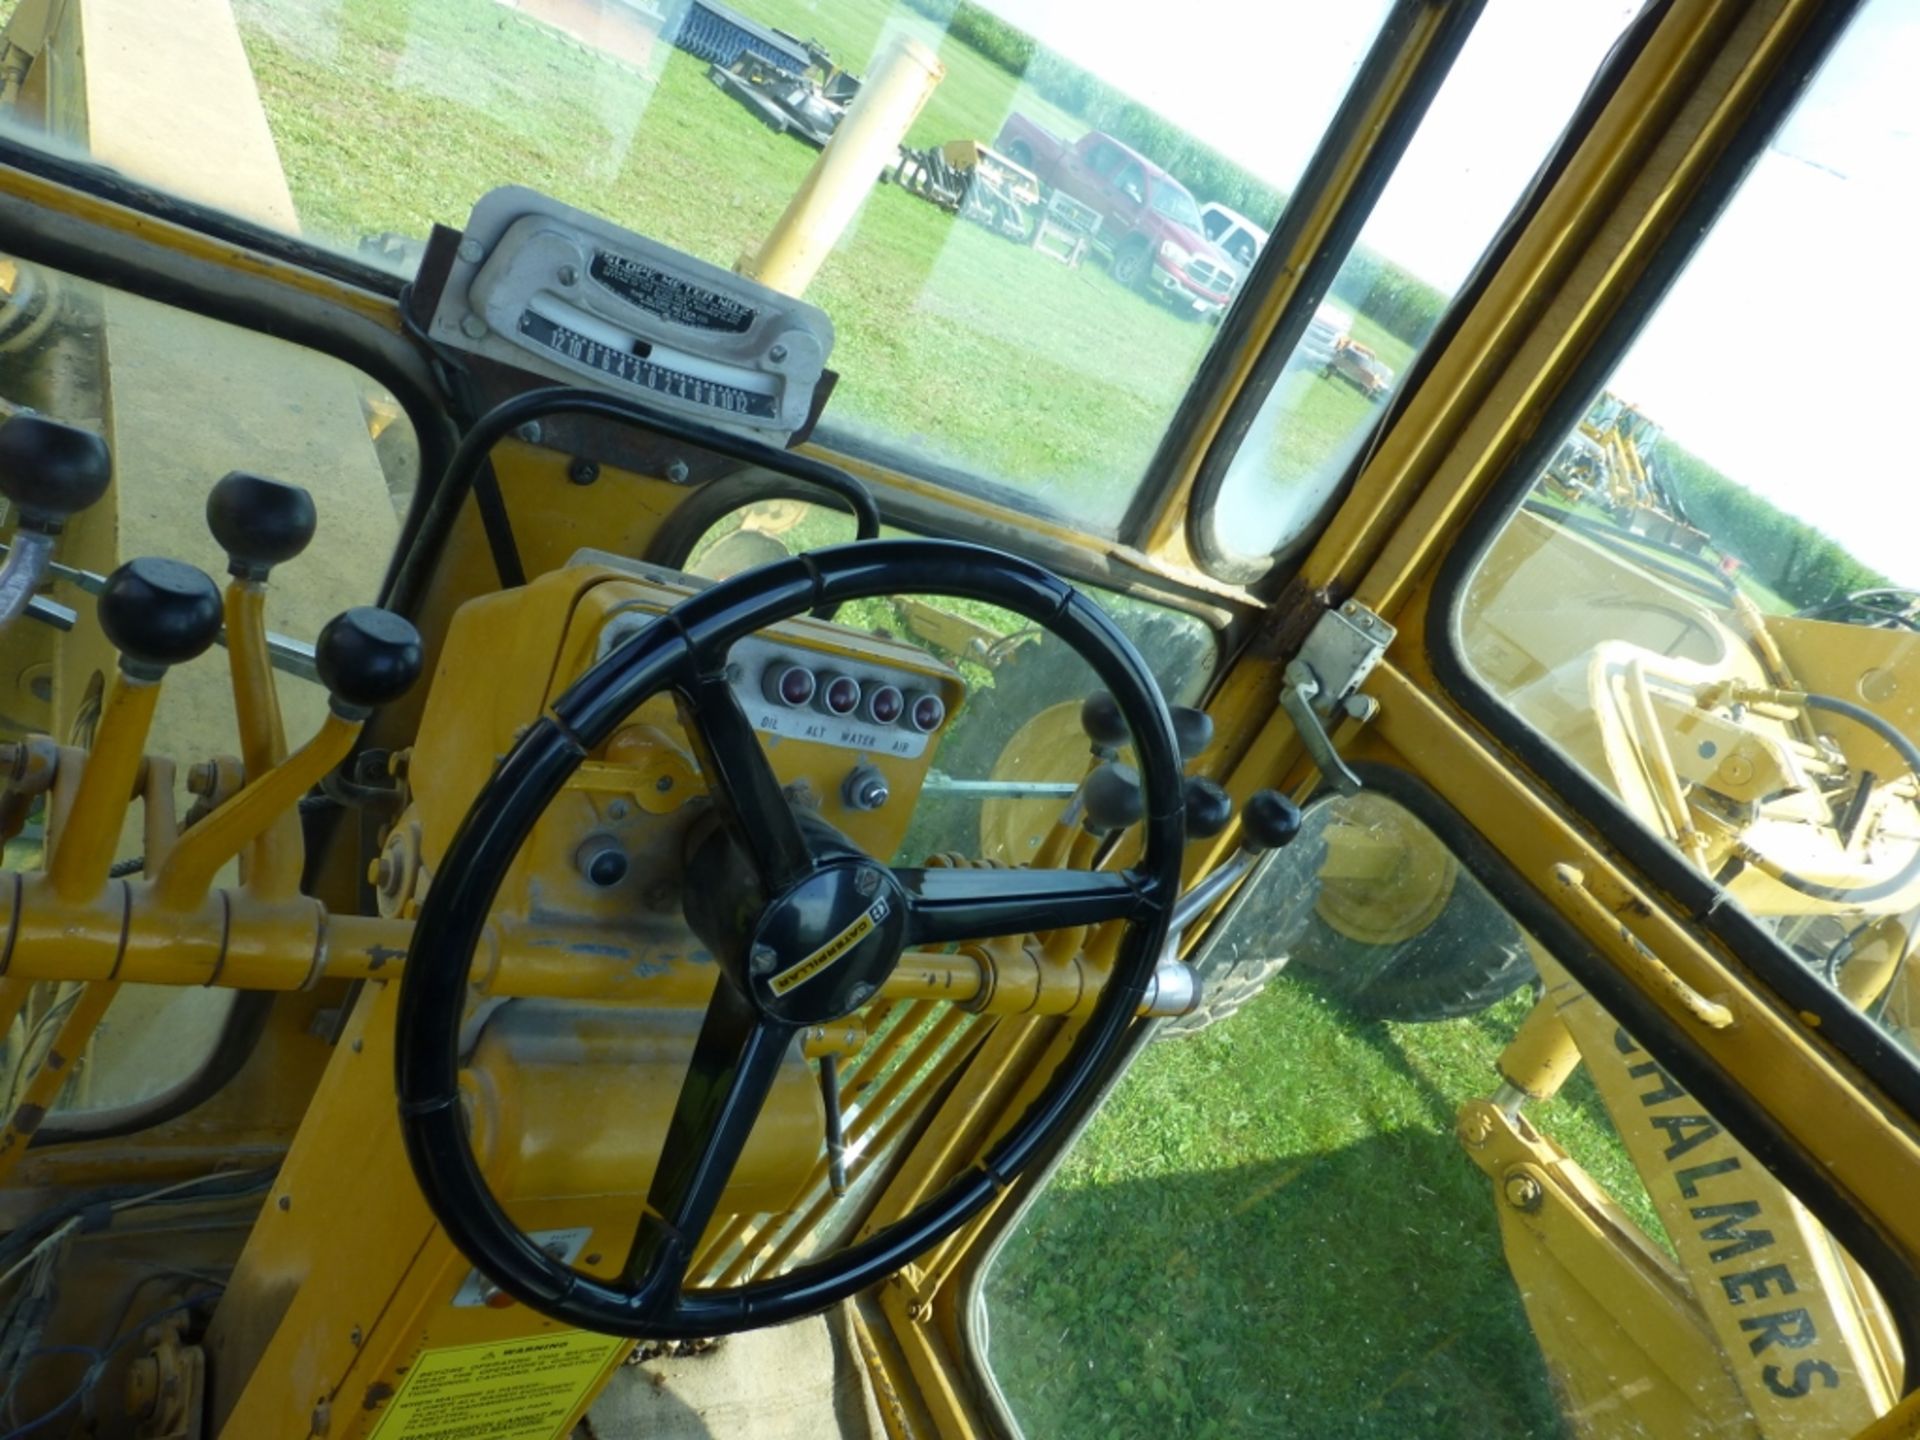 Caterpillar 120G motor grader with 13'10" moldboard se:87v871. Power shift. 7720 unverified hrs. - Image 27 of 27